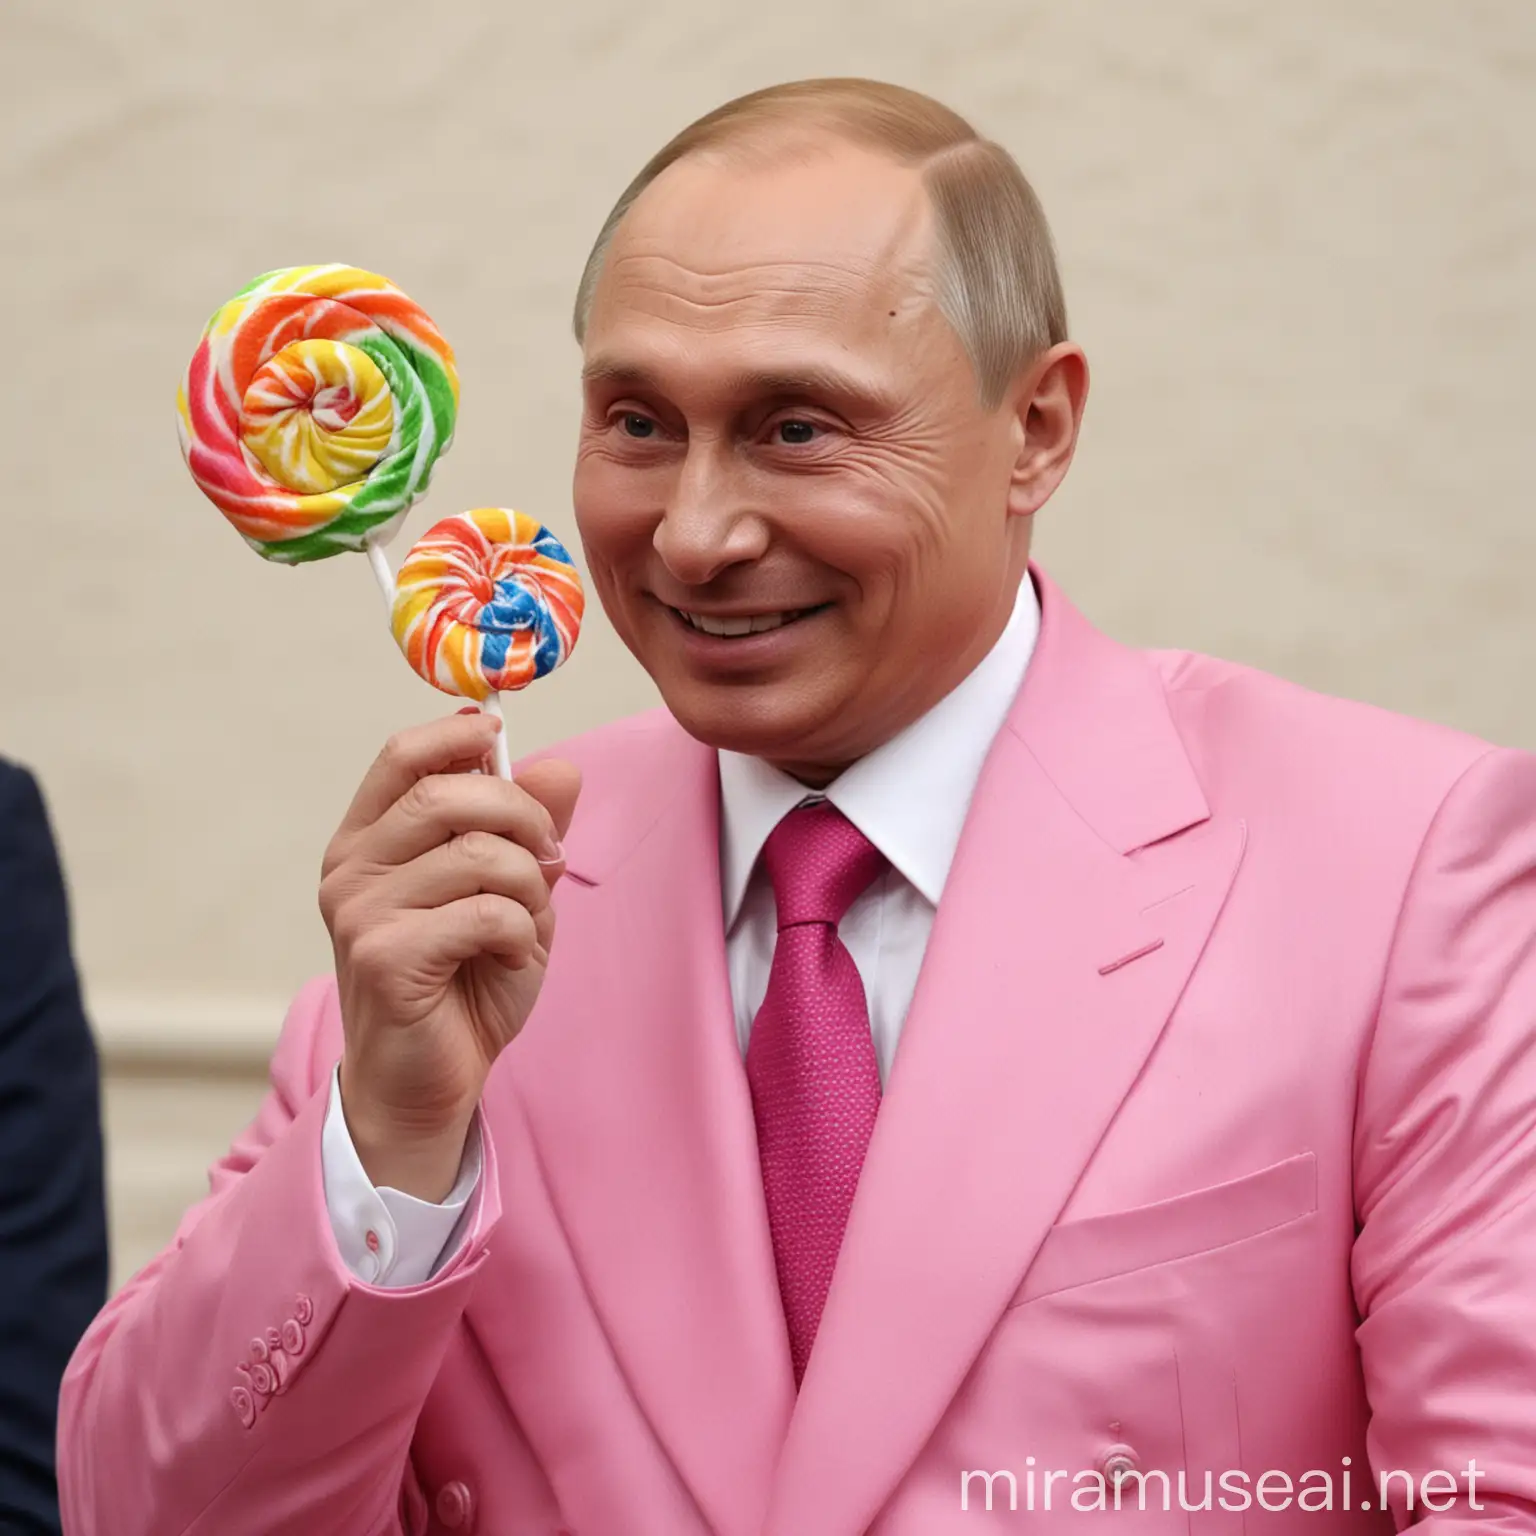 Vladimir Putin Smiling in Pink Suit with Rainbow Pigtails and Lollipop